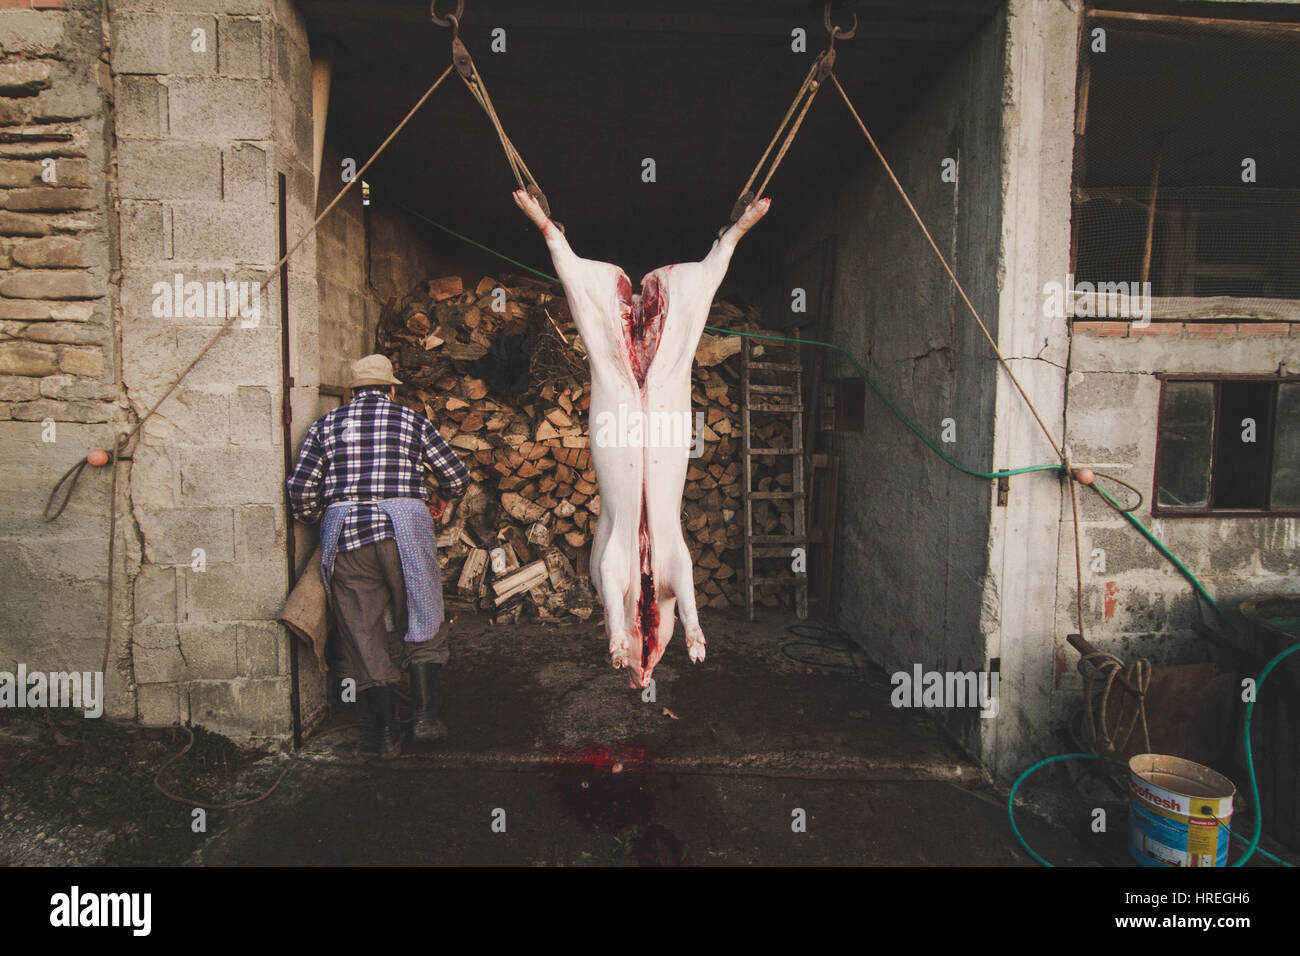 Dead pig cut open by a man in a slaughterhouse in Alba, which is located in the province of Piedmont, Italy. Stock Photo